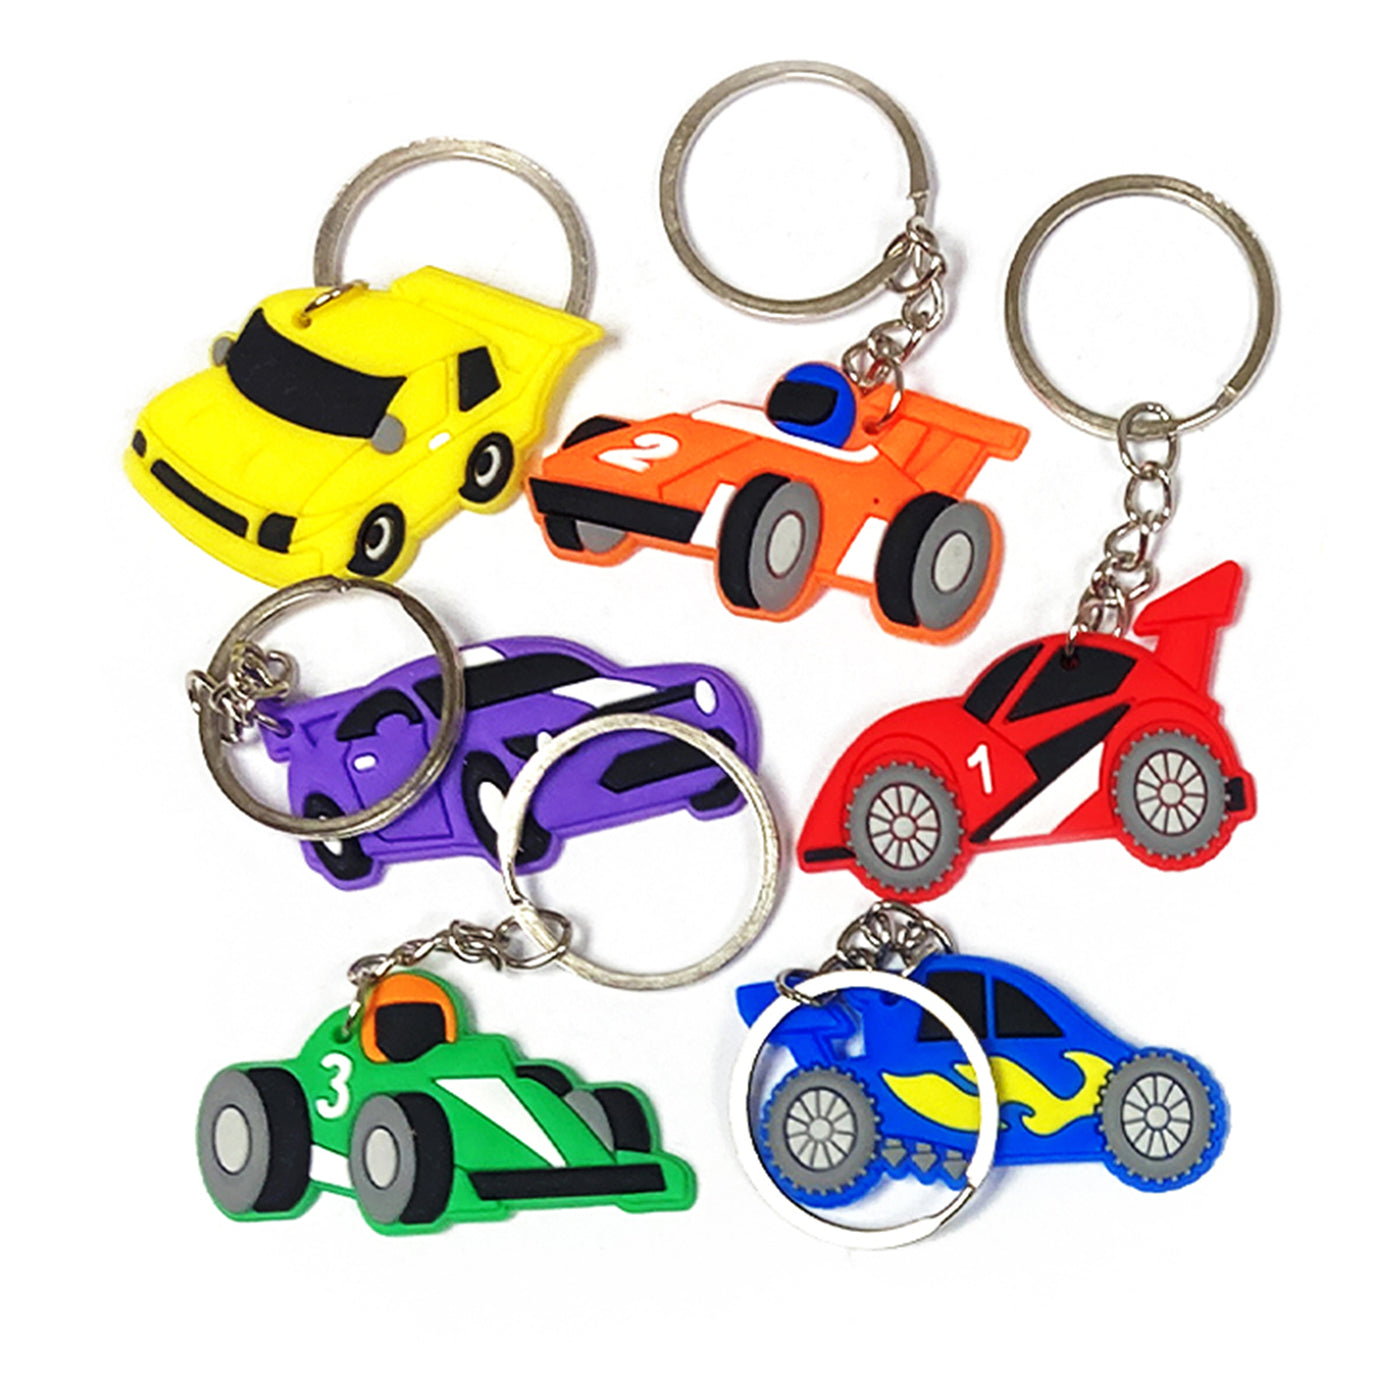 Children's Pre Filled Cars Party Goody Bags With Toys And Sweets. Boys Party Favours.